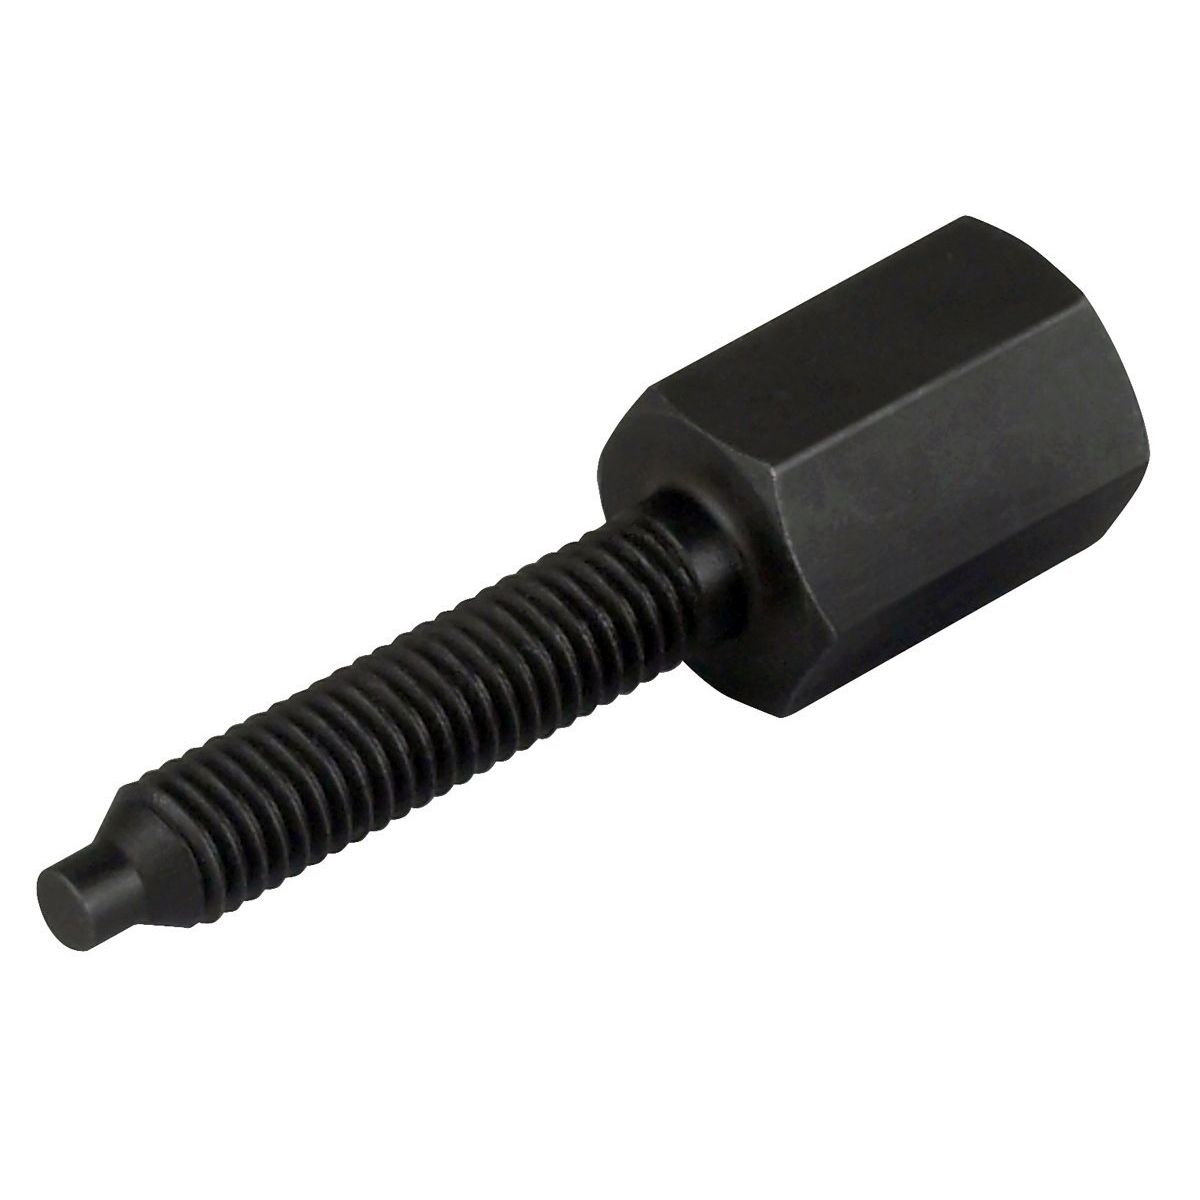 Grip Wrench Adapter - Single Lead Thread